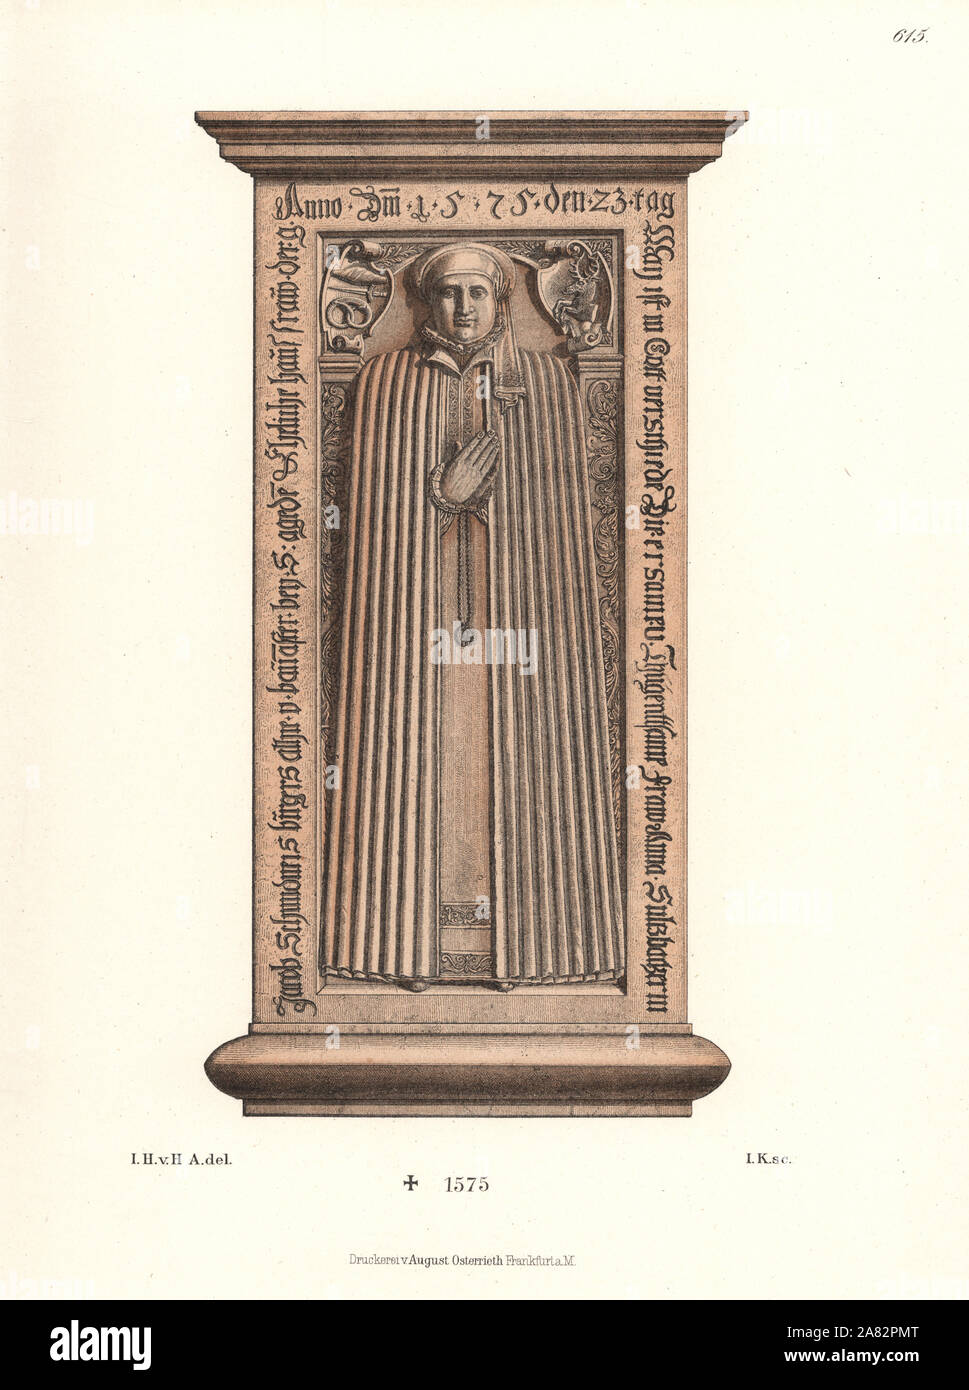 Gravestone of Anna Schmittner, died 1575, from the wall of St. Agatha Church in Aschaffenburg. Chromolithograph from Hefner-Alteneck's Costumes, Artworks and Appliances from the Middle Ages to the 17th Century, Frankfurt, 1889. Illustration by Dr. Jakob Heinrich von Hefner-Alteneck, lithographed by I. K. Dr. Hefner-Alteneck (1811-1903) was a German museum curator, archaeologist, art historian, illustrator and etcher. Stock Photo